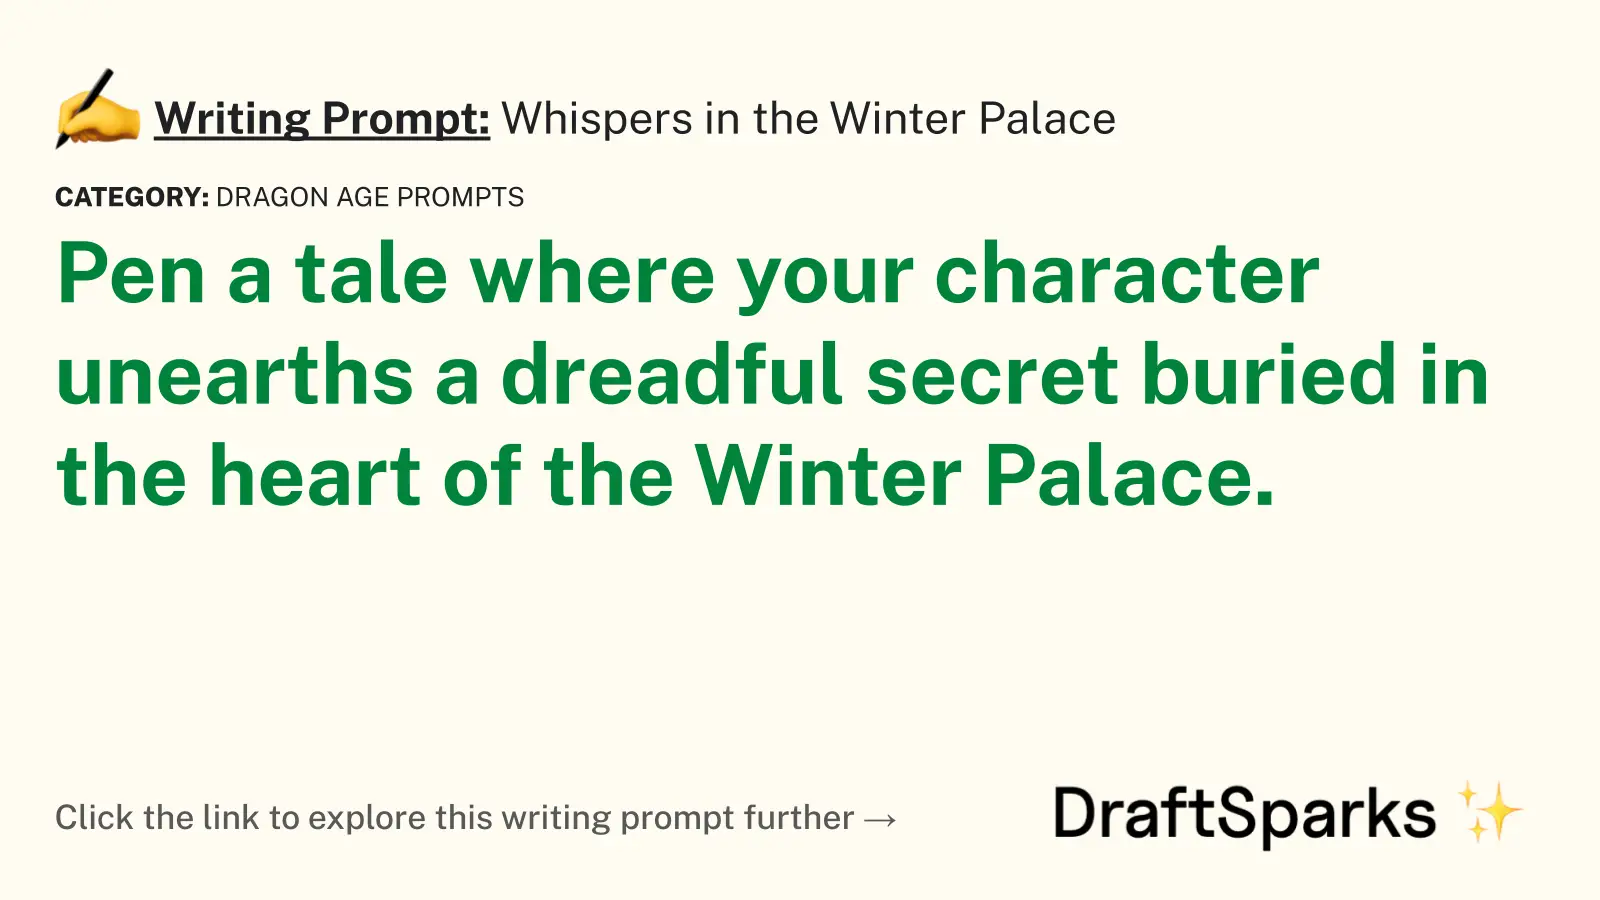 Whispers in the Winter Palace